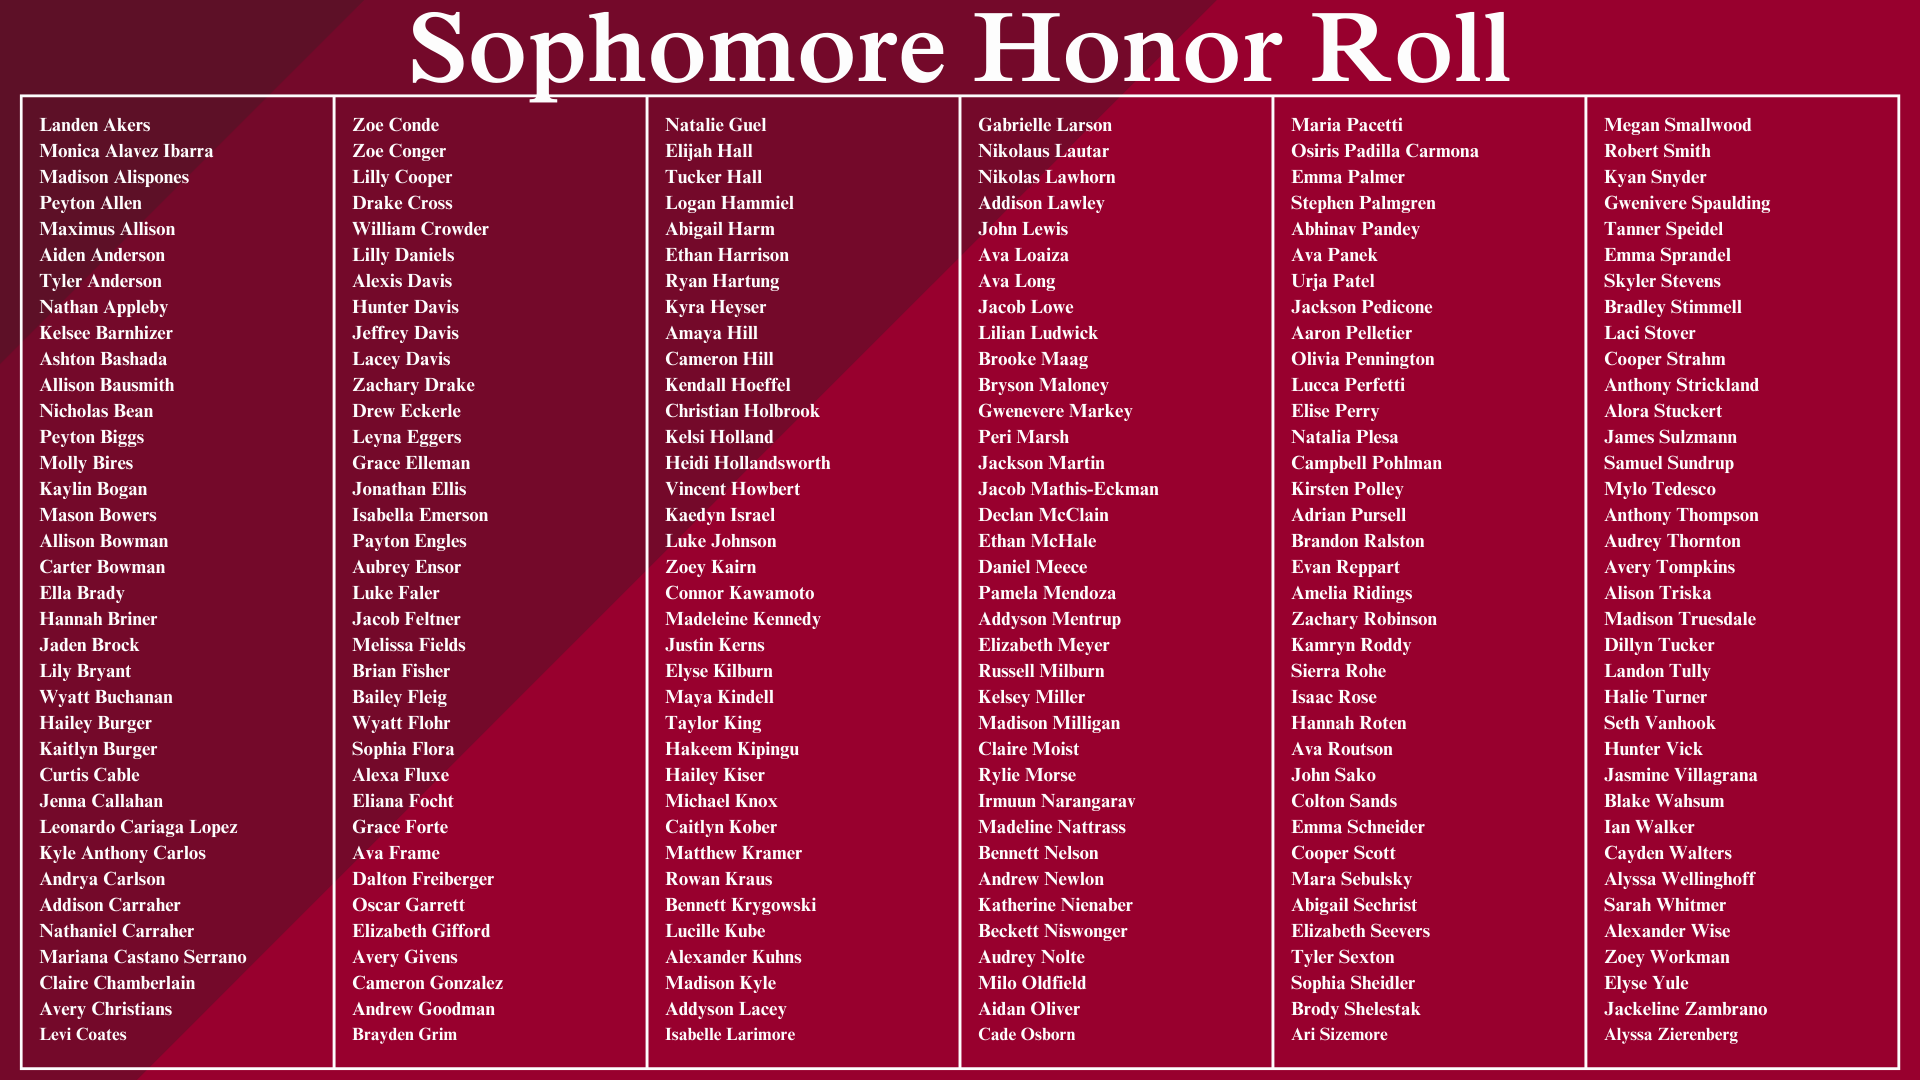 10th honor roll